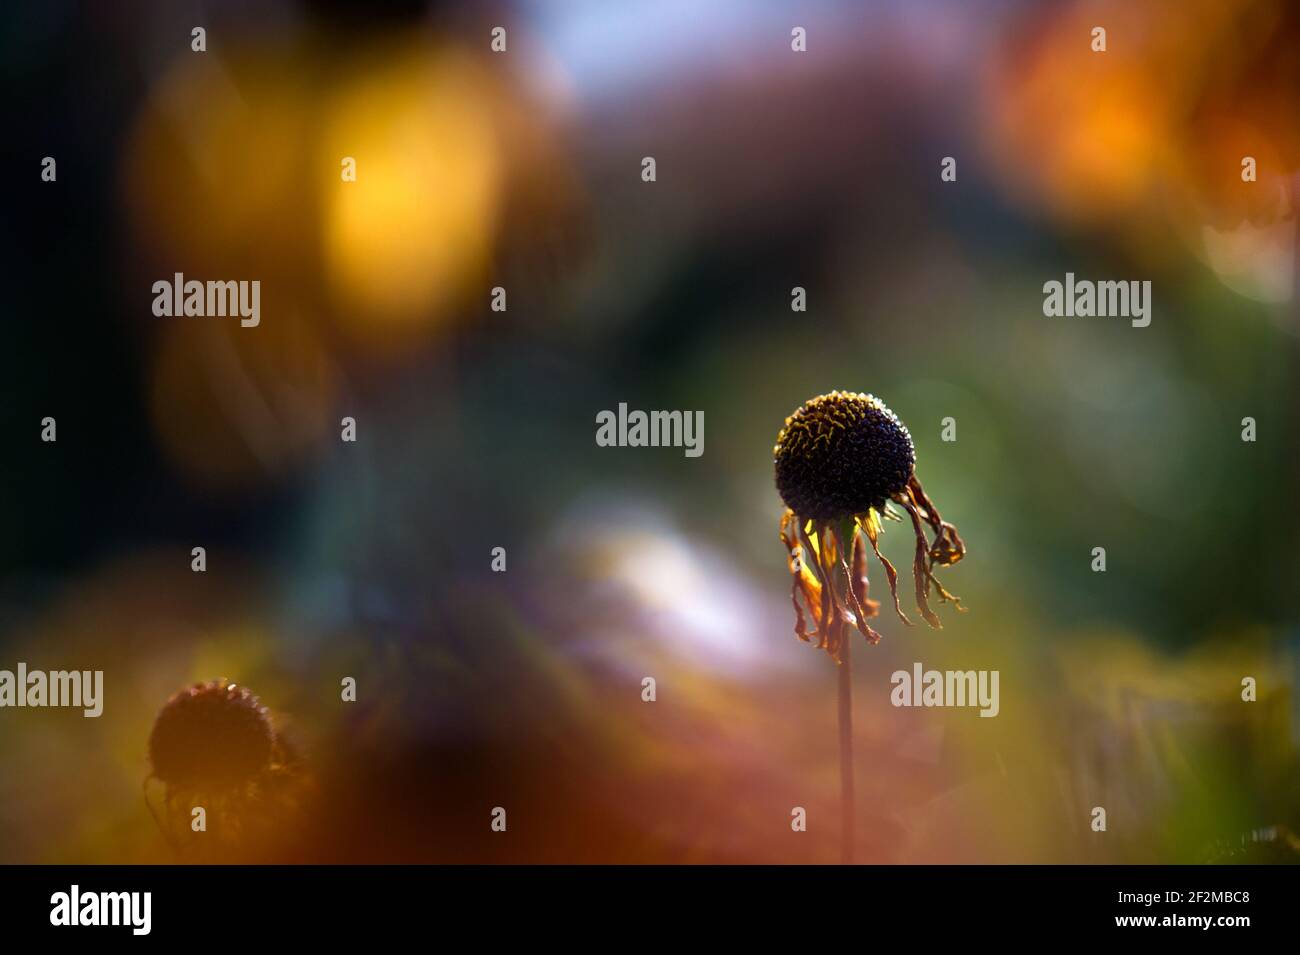 A single dying helenium flower, backlit against a beautiful background of out-of-focus flowers softly lit. With copy space. Stock Photo